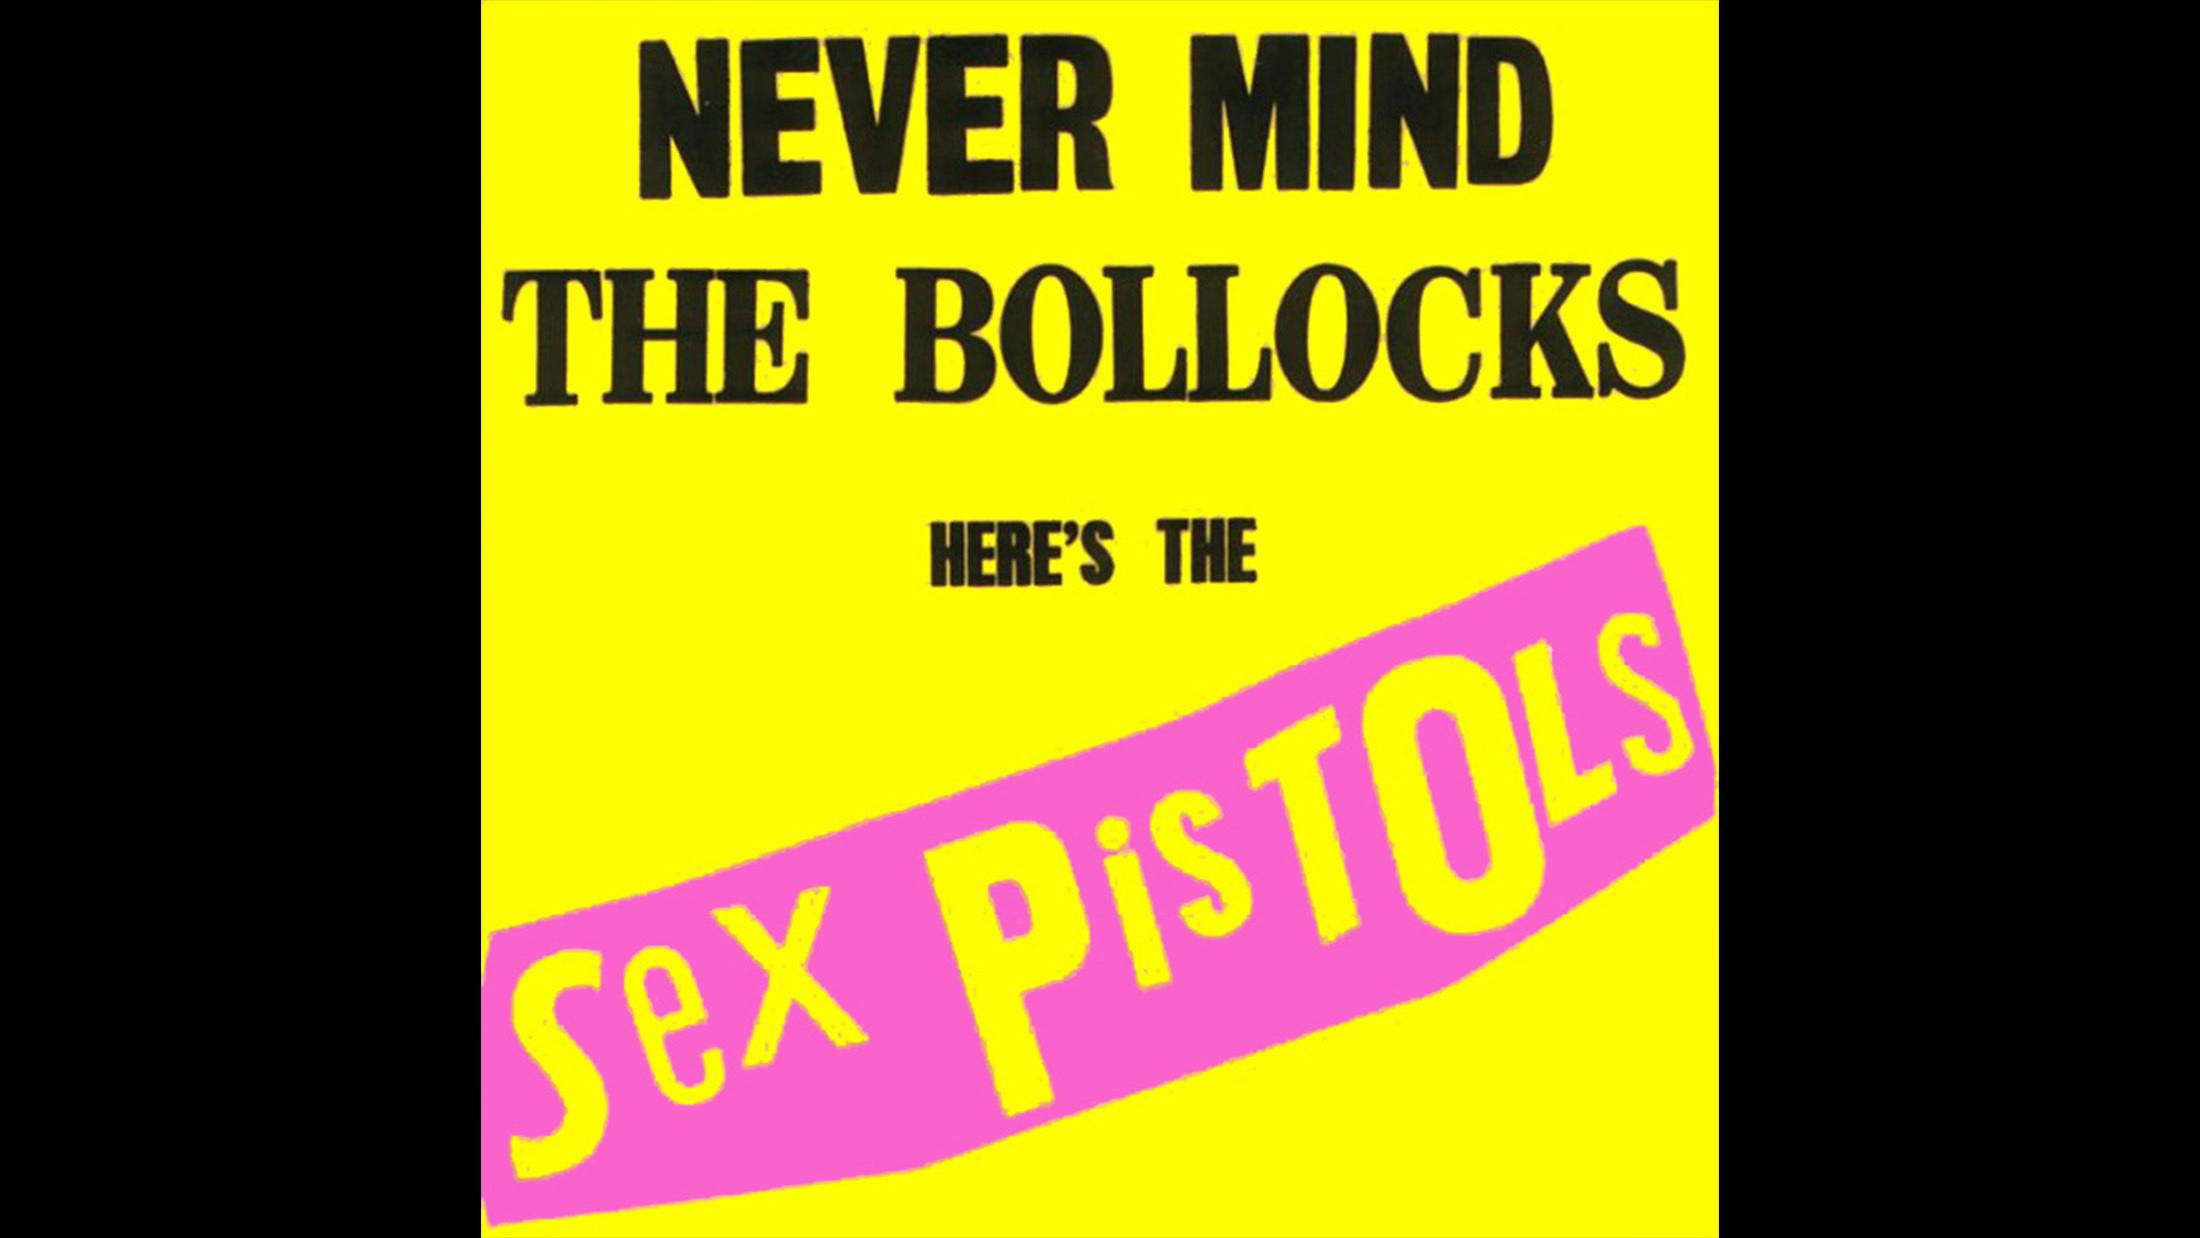 Though time, distance and cultural changes may have tamed its seething sense of danger somewhat, this, in many ways, was the definitive sound of disaffection in ‘77. Before punk became co-opted and repackaged as cuddly postcard novelty, Sex Pistols signified all that was great and gobby about pissed-off British youth starting bands and raging against the system. Their impact was seismic, inspiring peers and generations to come. And despite how rewritten history might sometimes make it seem – ill-advised reformations and butter adverts, notwithstanding – the scrappy London five-piece remain a vital punk touchstone, and never moreso than on the purity of their one and only studio album.